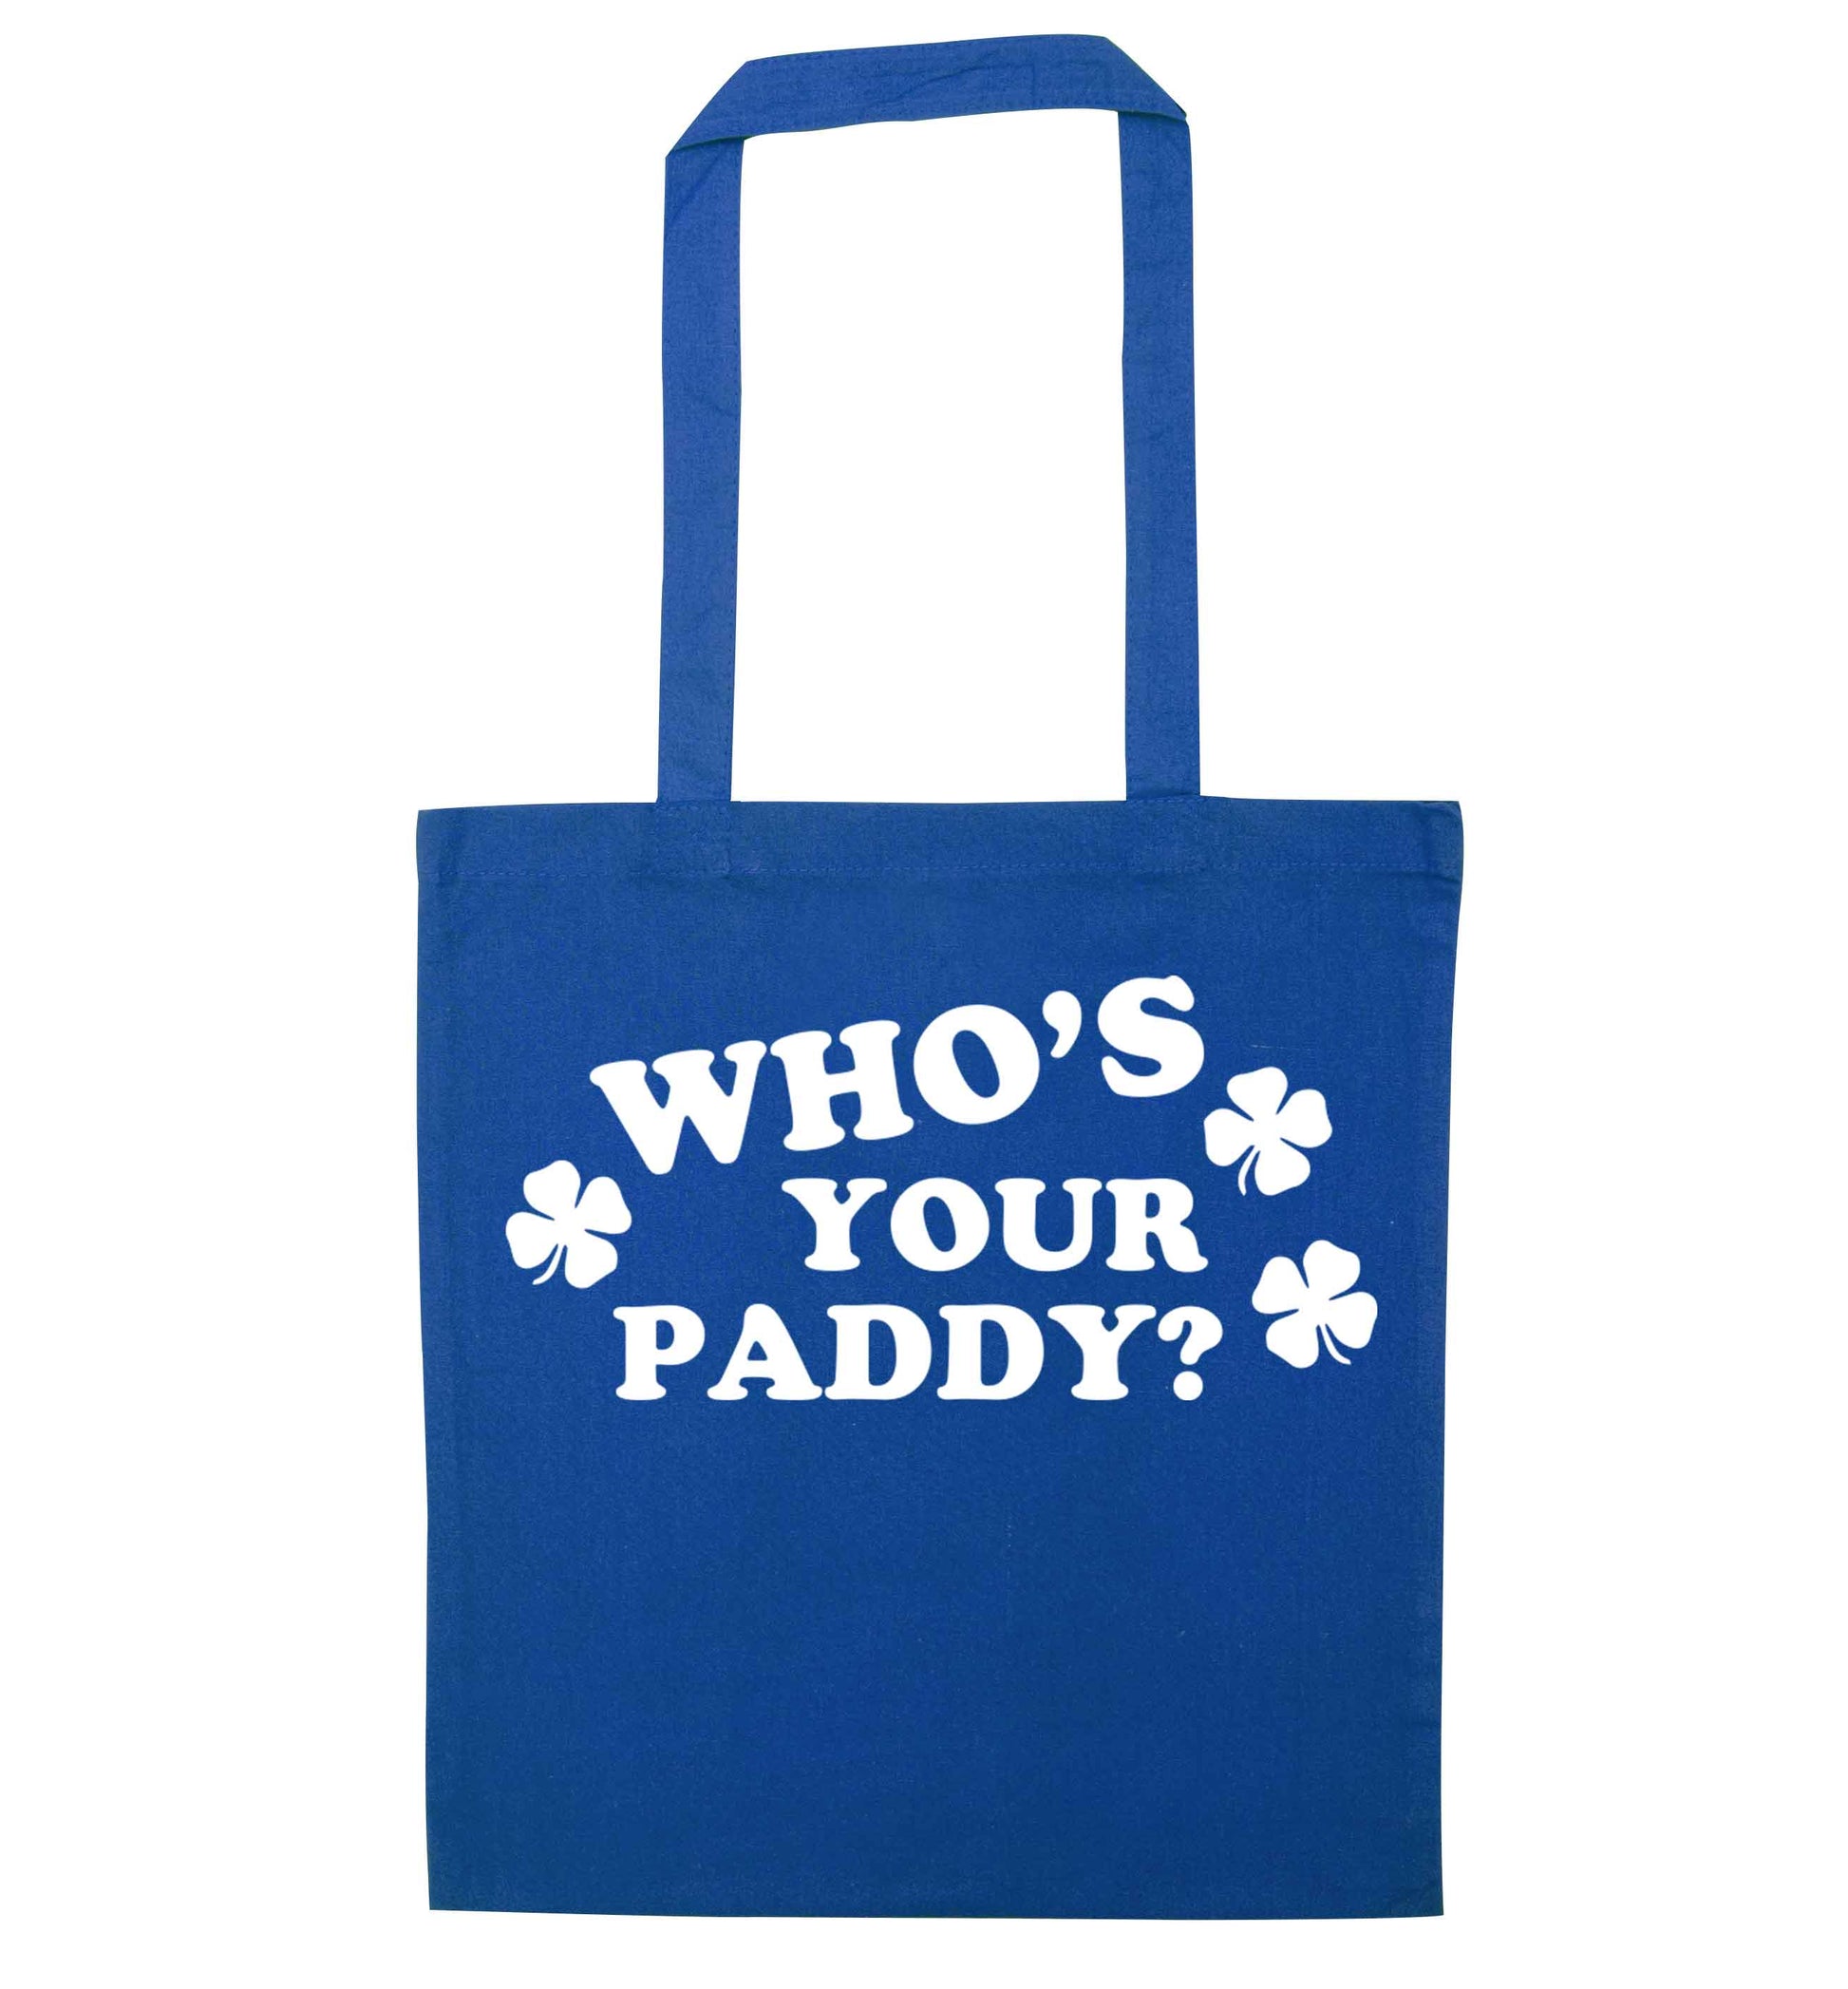 Who's your paddy? blue tote bag